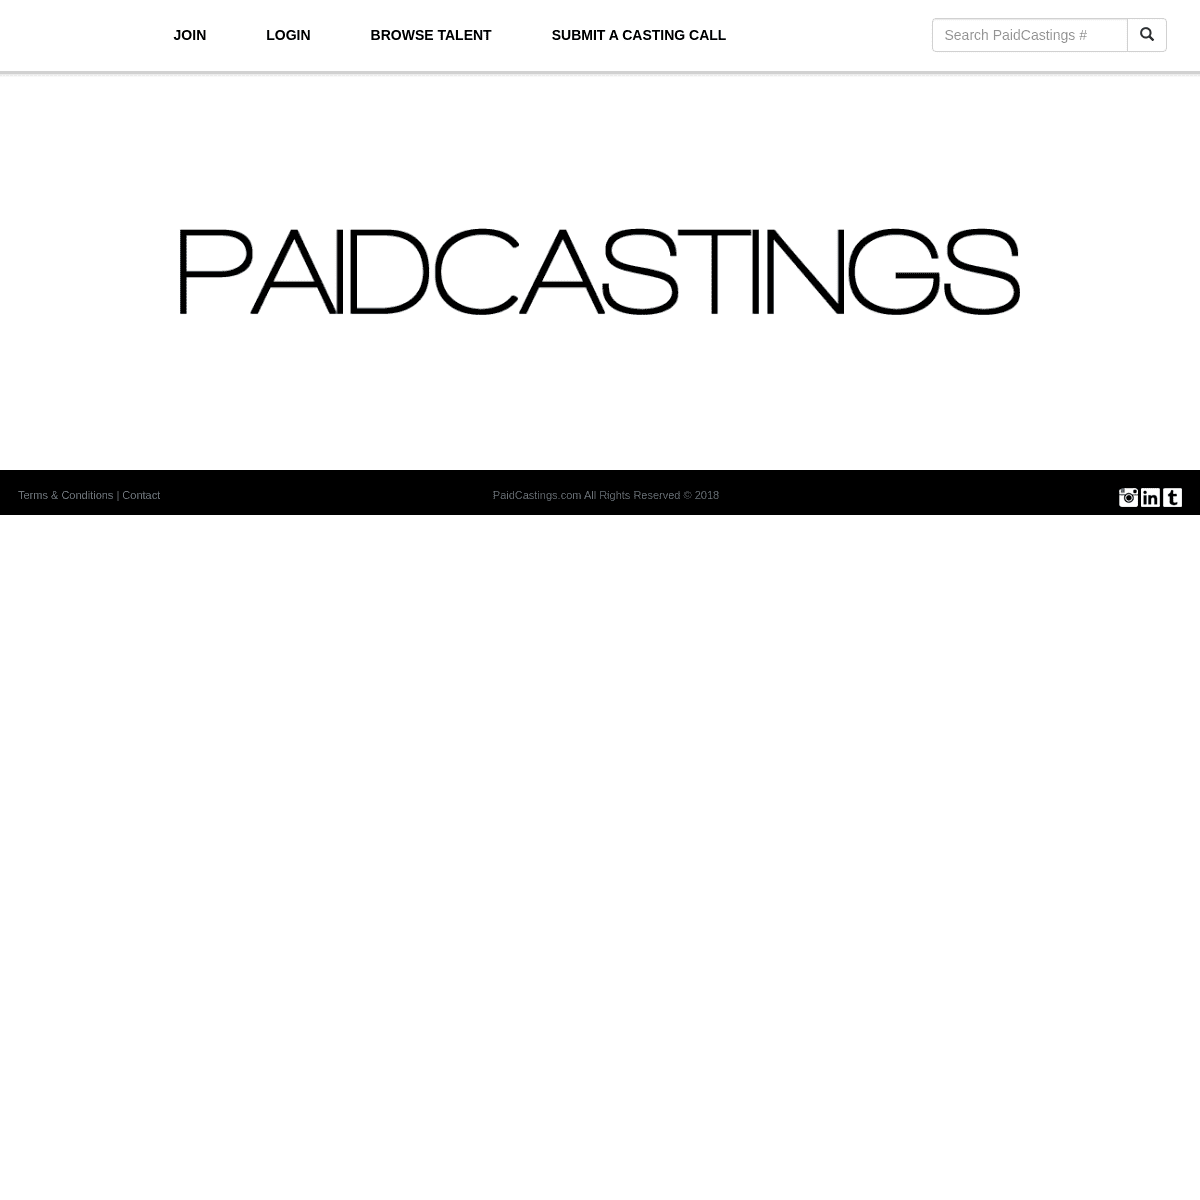 A complete backup of paidcastings.com